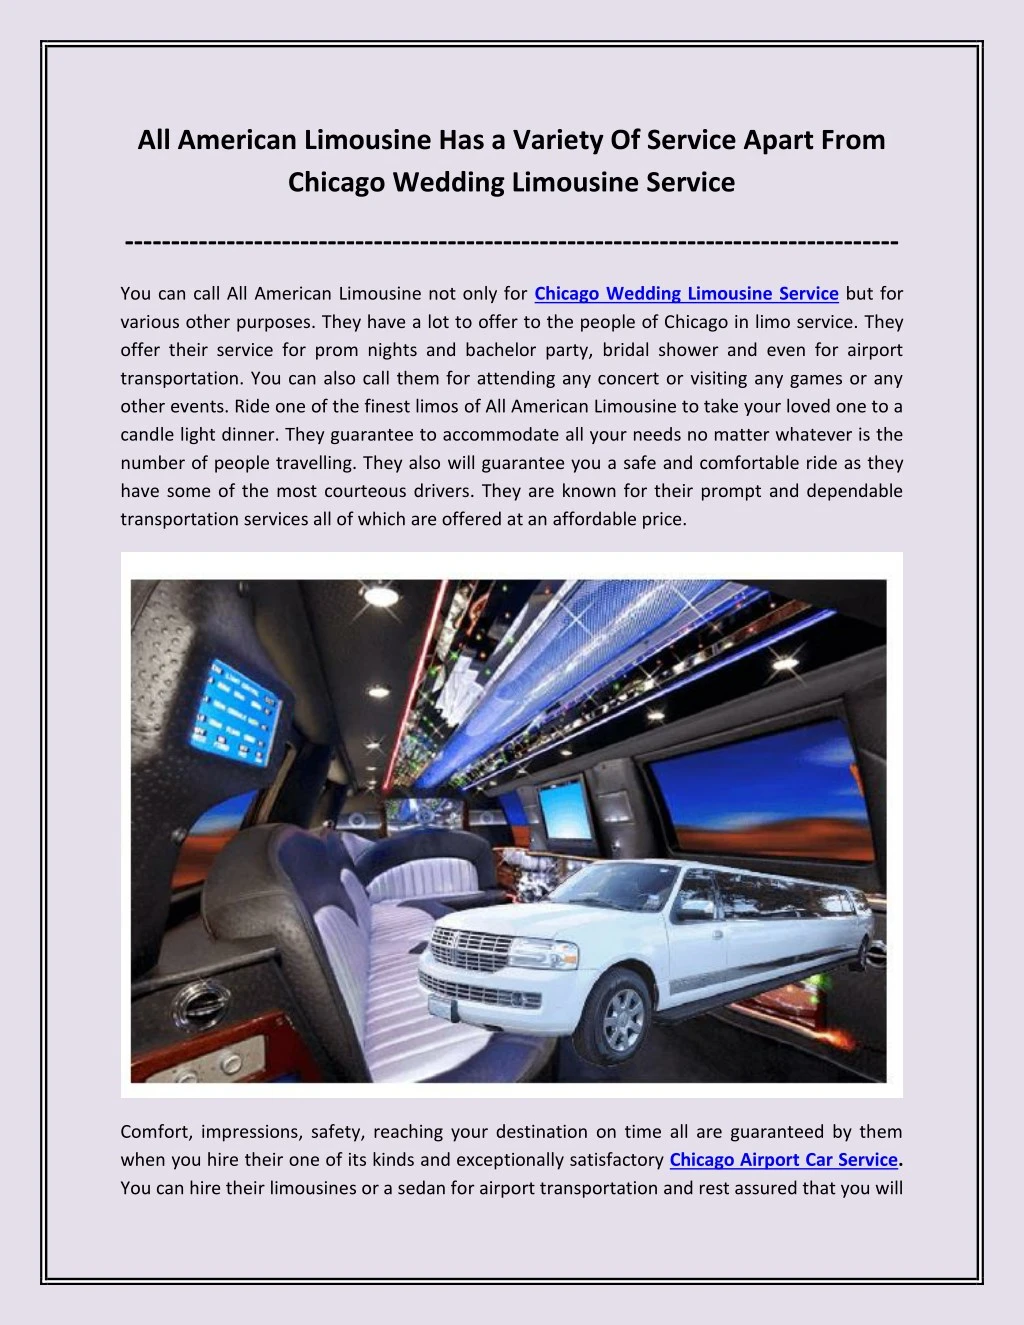 all american limousine has a variety of service